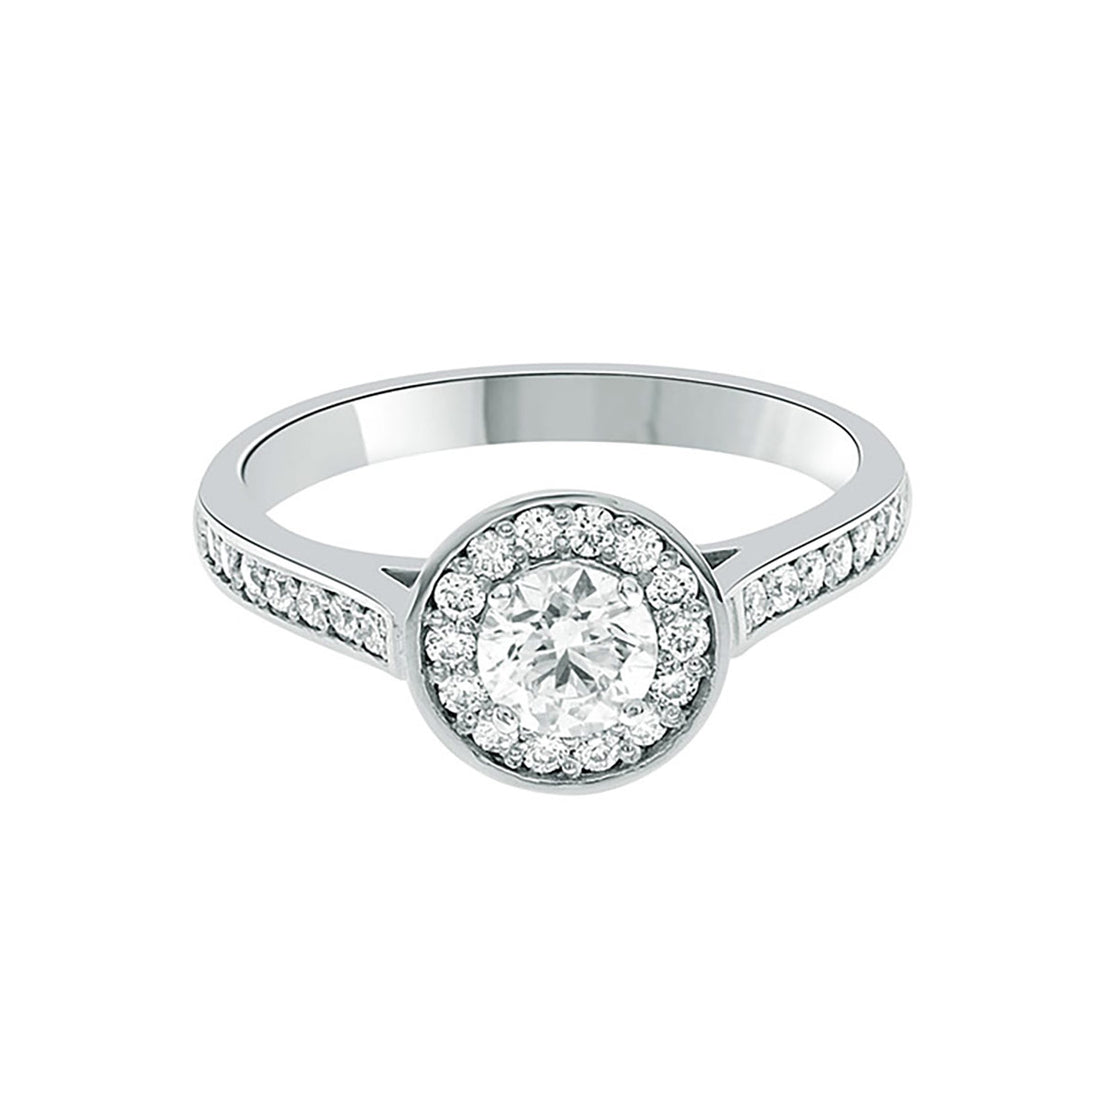 Round Halo Engagement Ring in white gold